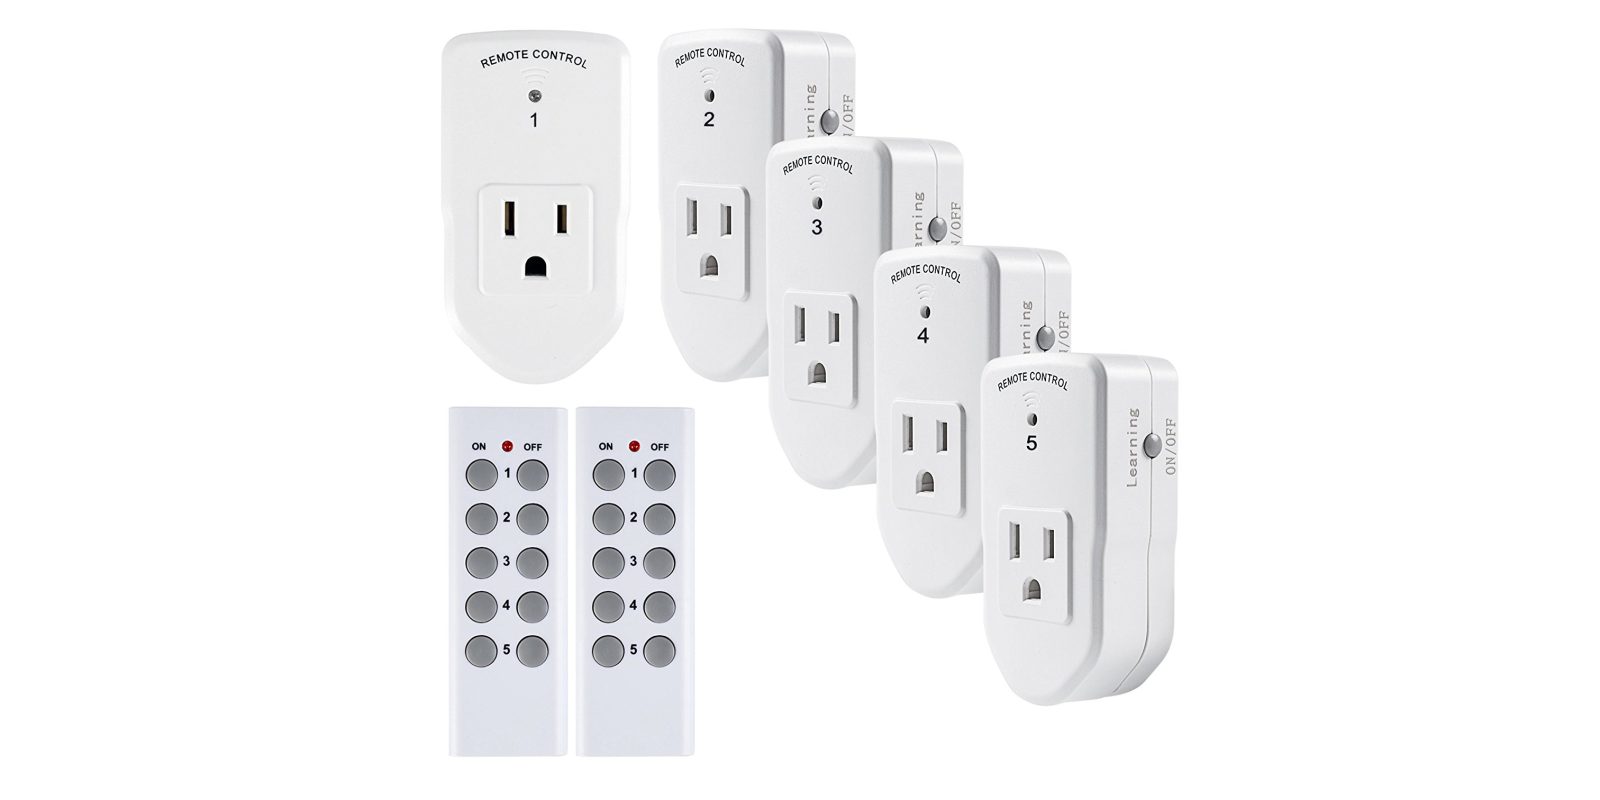 https://electrek.co/wp-content/uploads/sites/3/2018/10/century-remote-control-outlets.jpg?quality=82&strip=all&w=1600